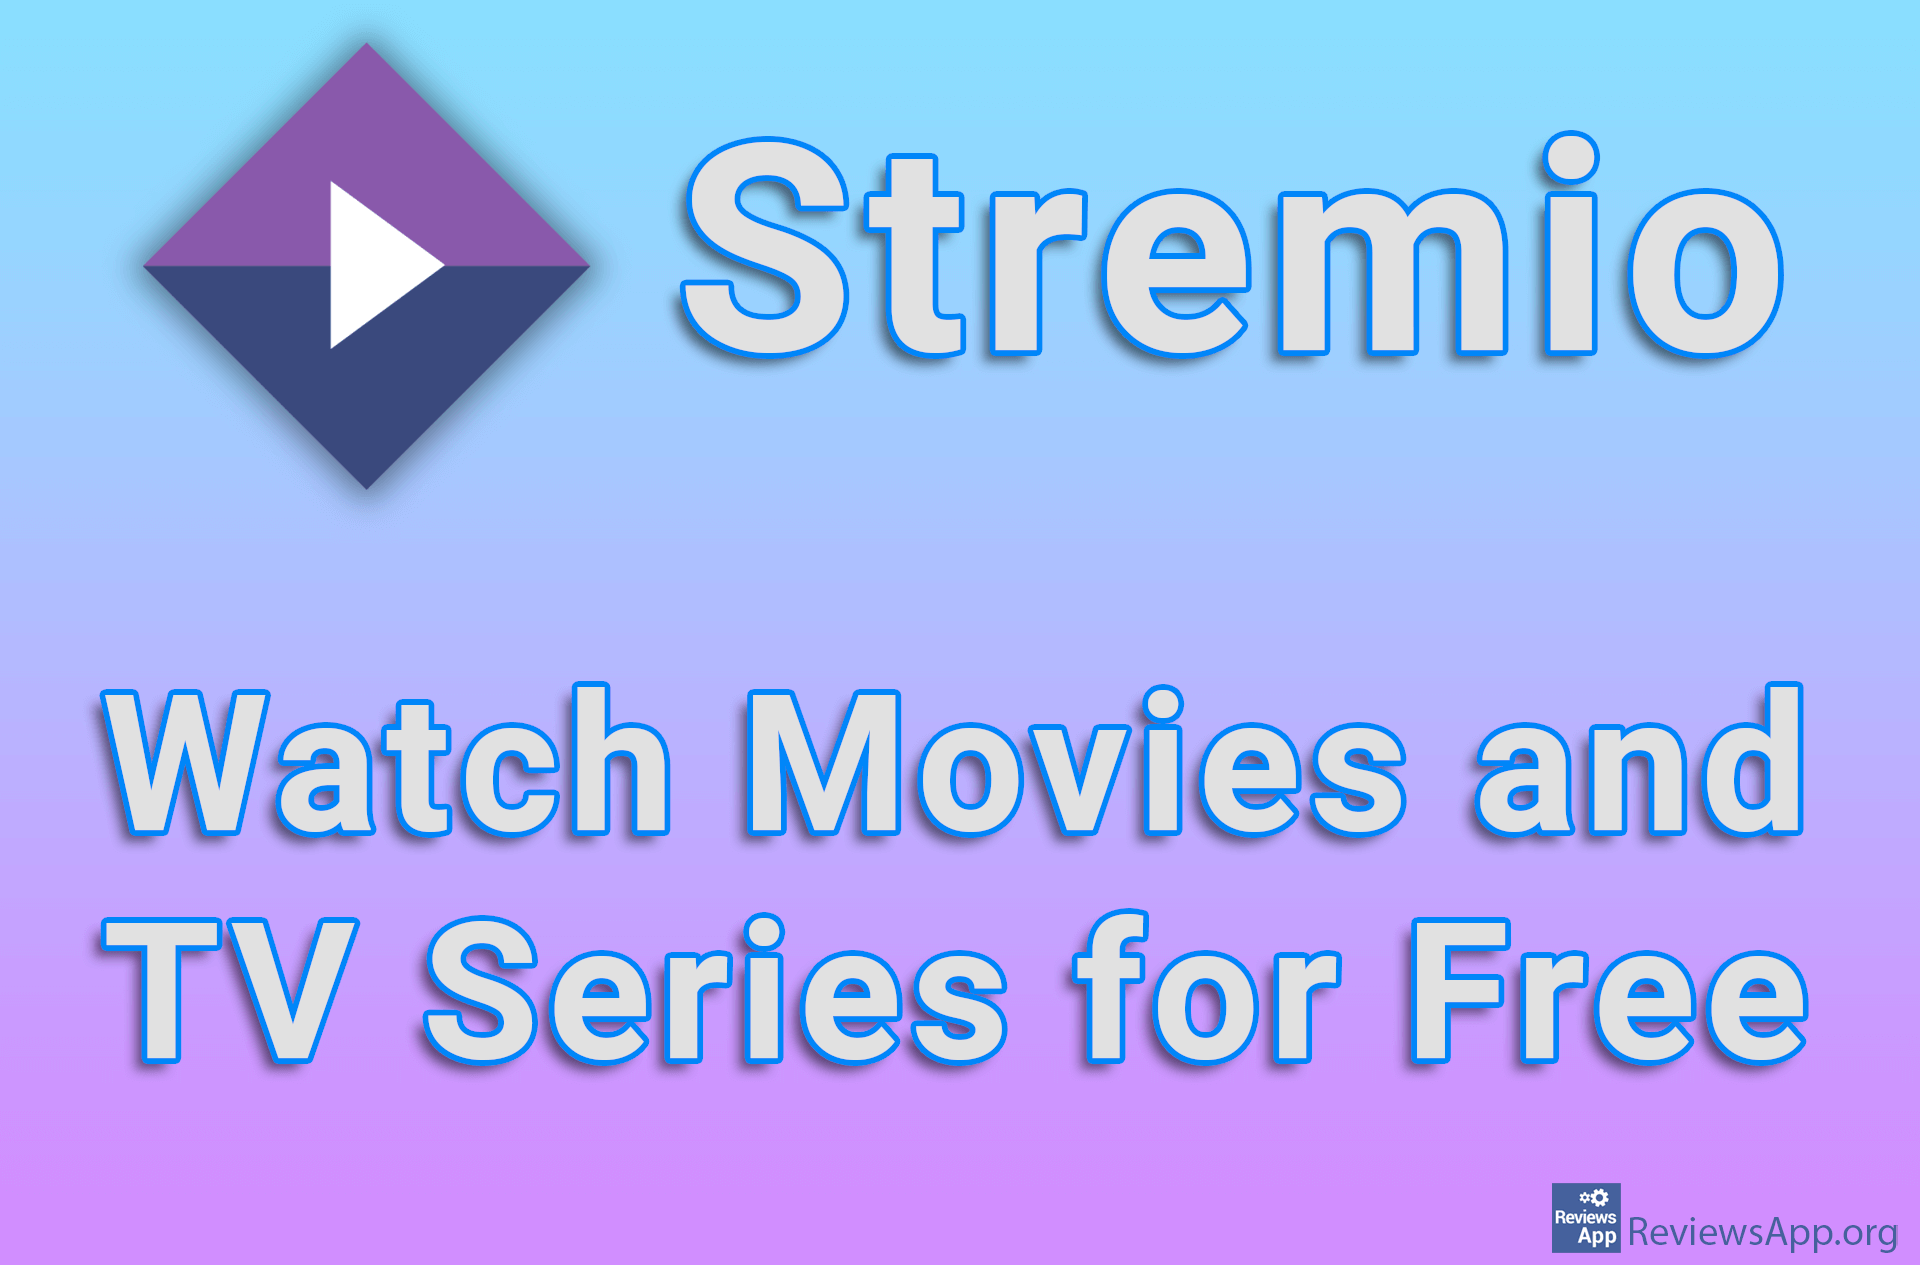 Stremio – Watch Movies and TV Series for Free